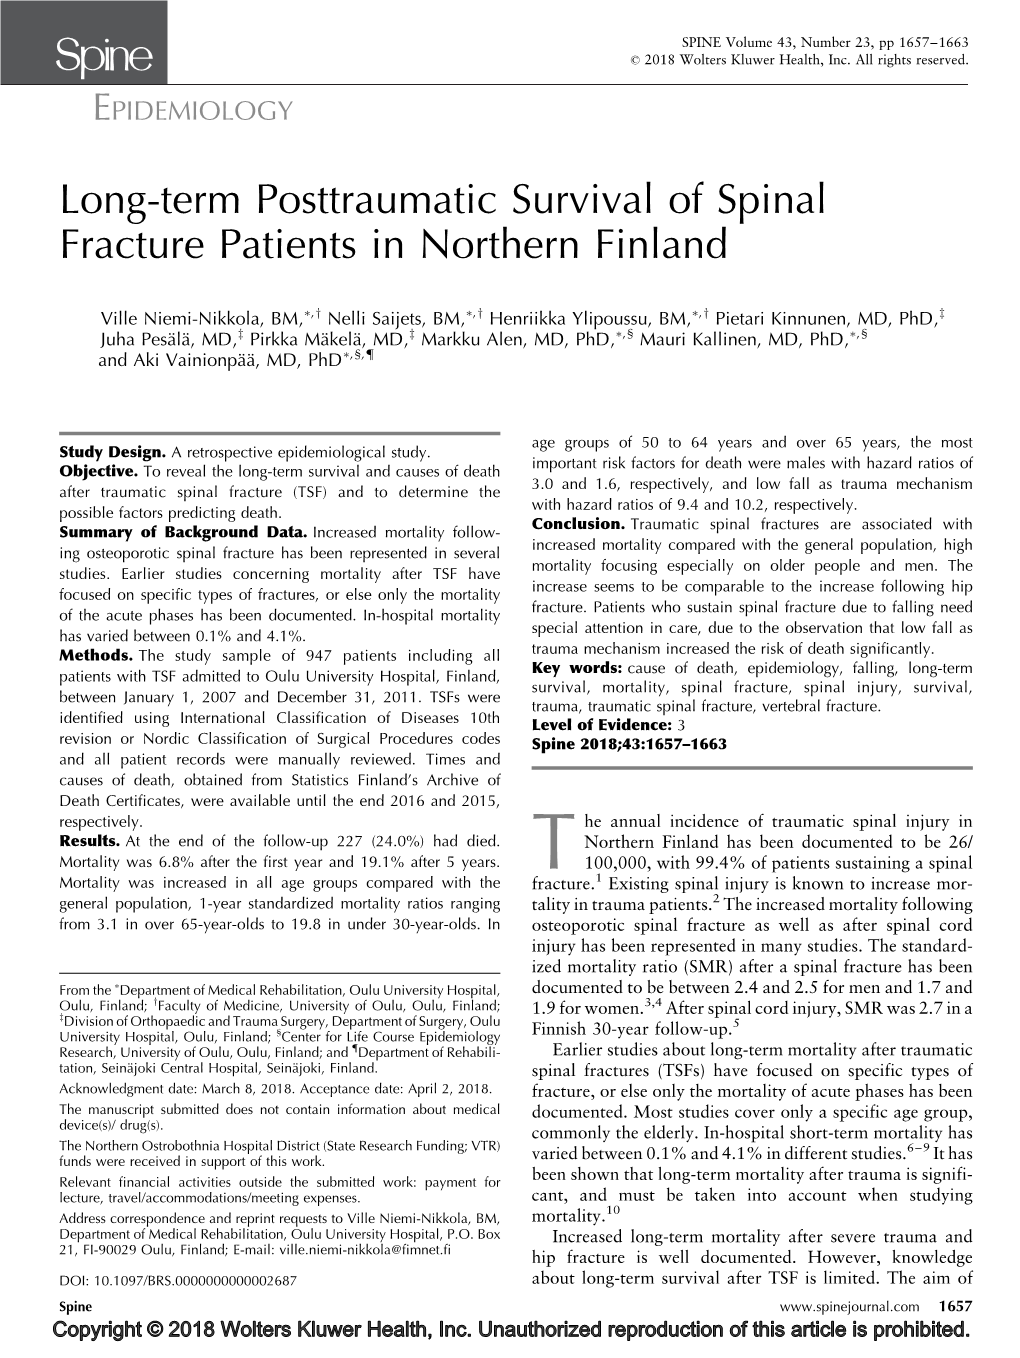 Long-Term Posttraumatic Survival of Spinal Fracture Patients in Northern Finland